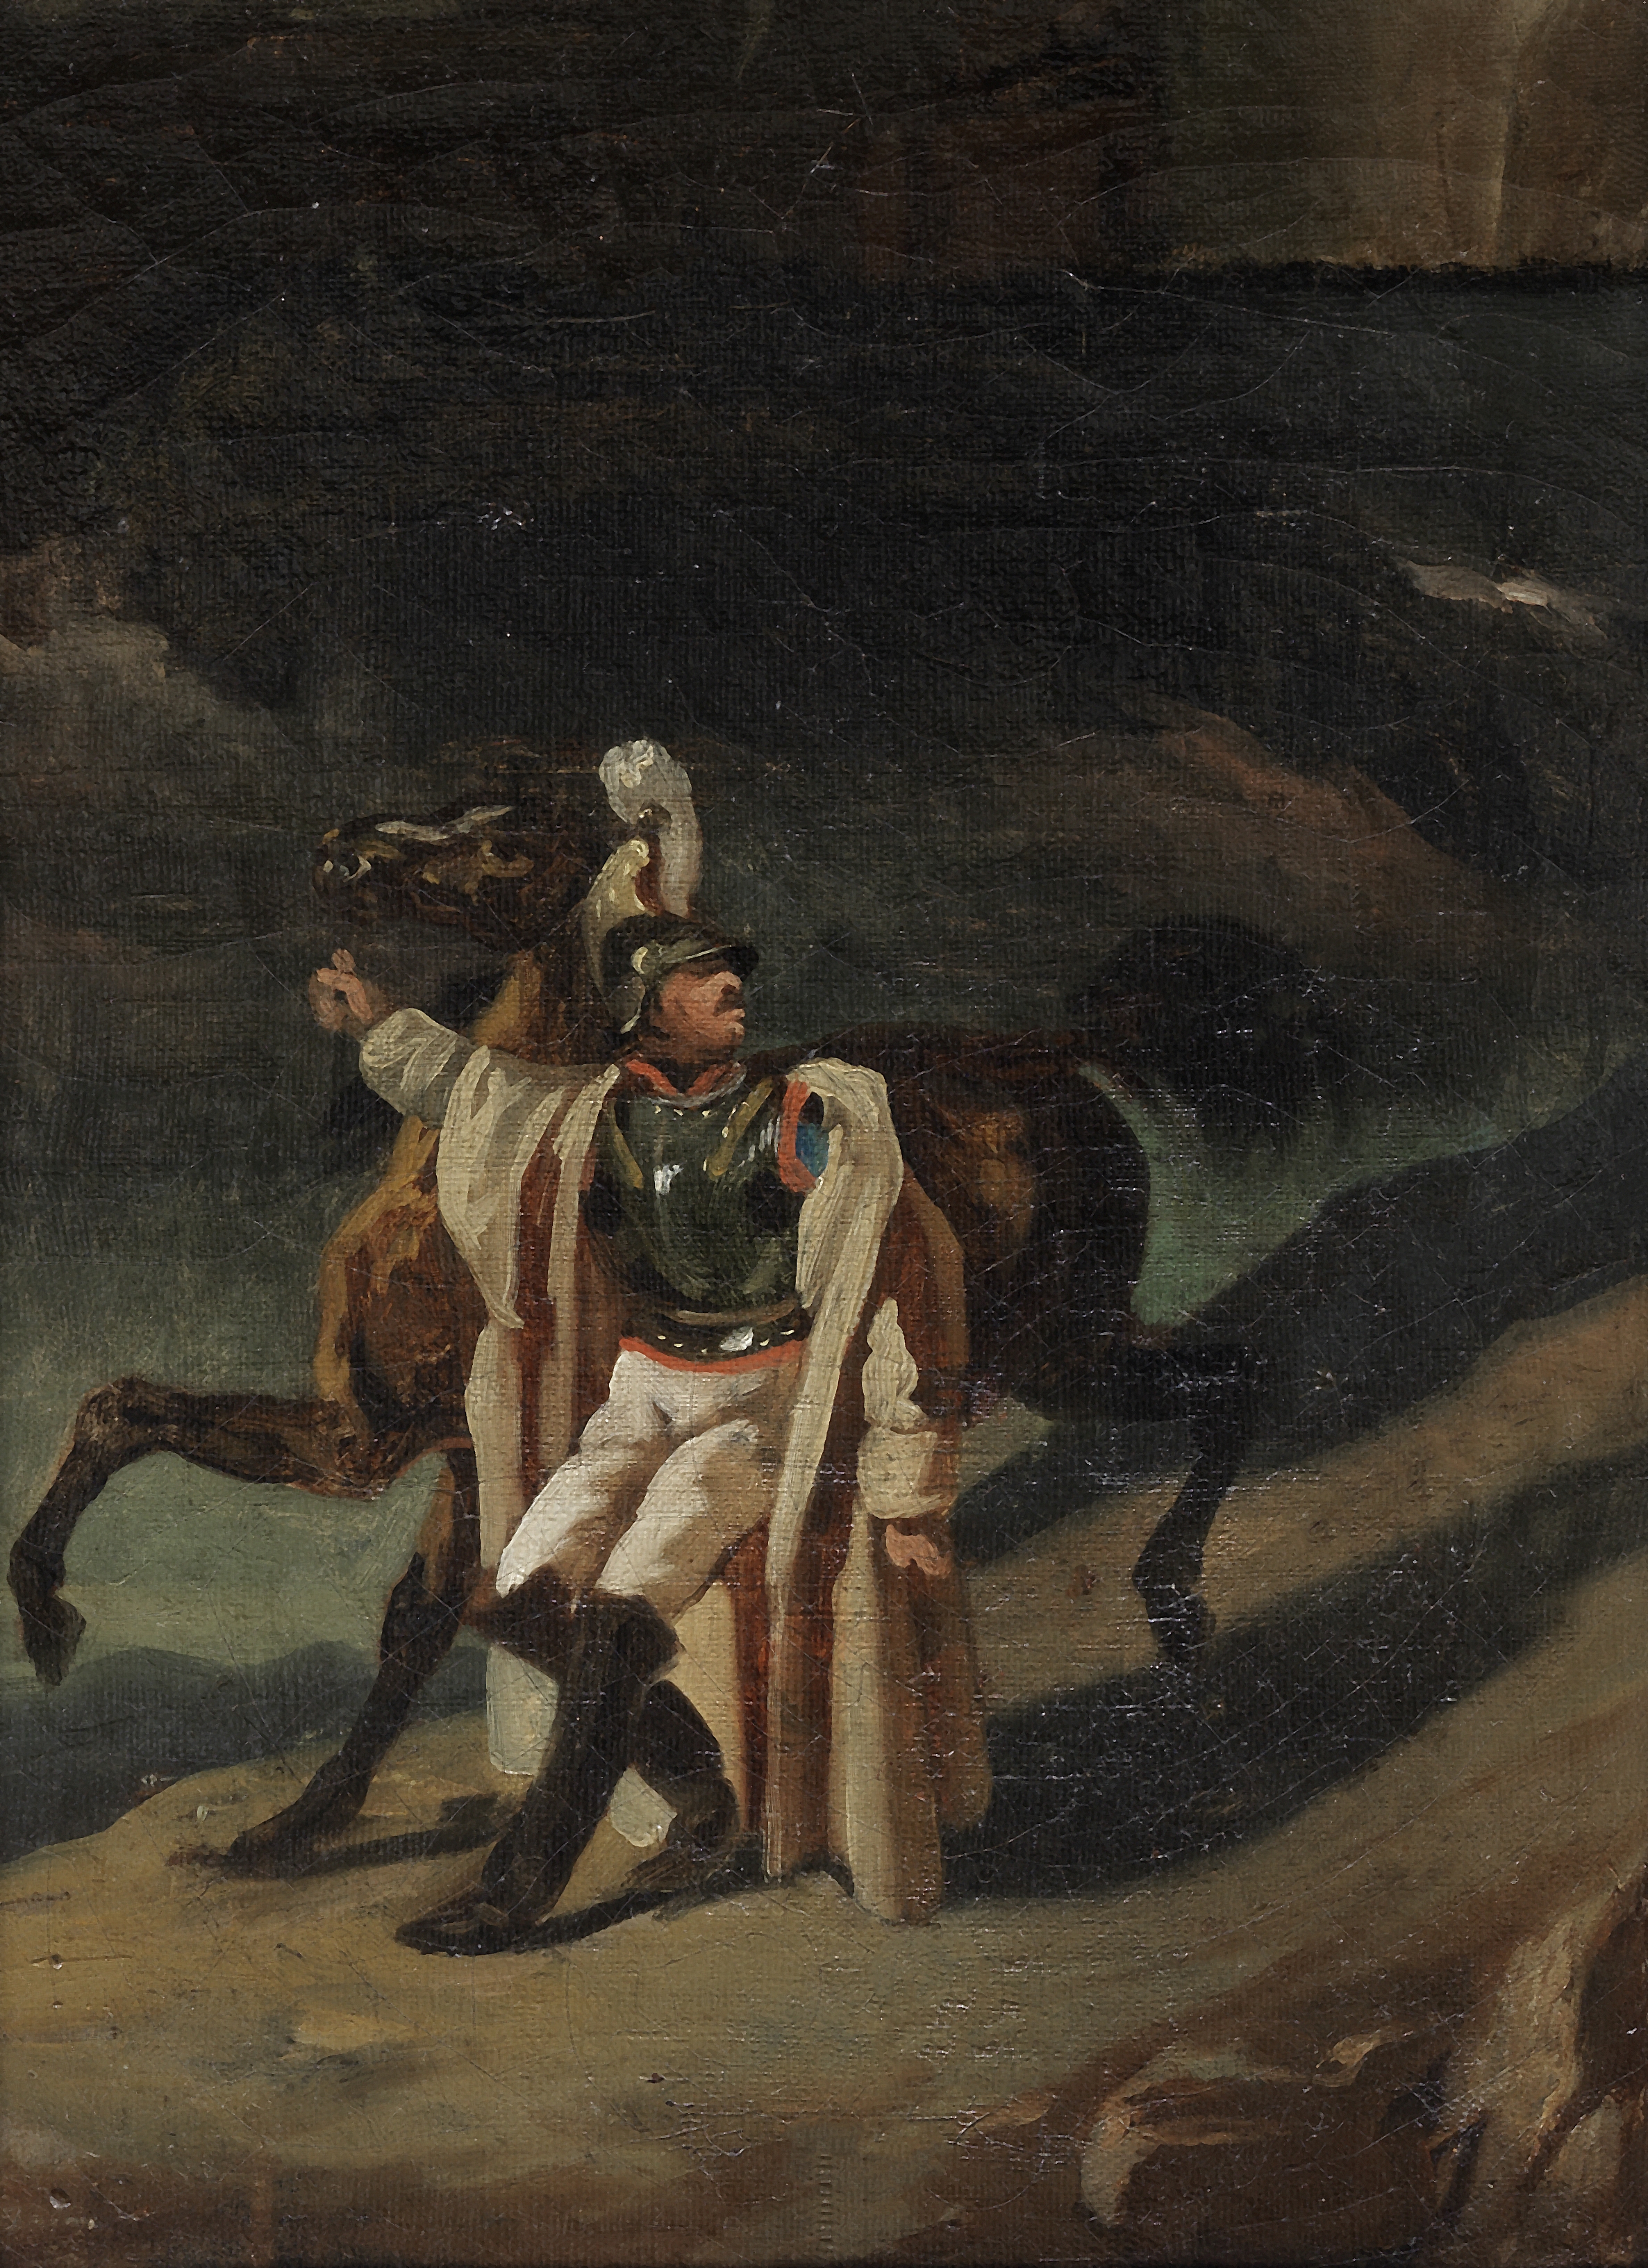 Th&#233;odore G&#233;ricault (Rouen 1791-1824 Paris) A study for The wounded Cuirassier